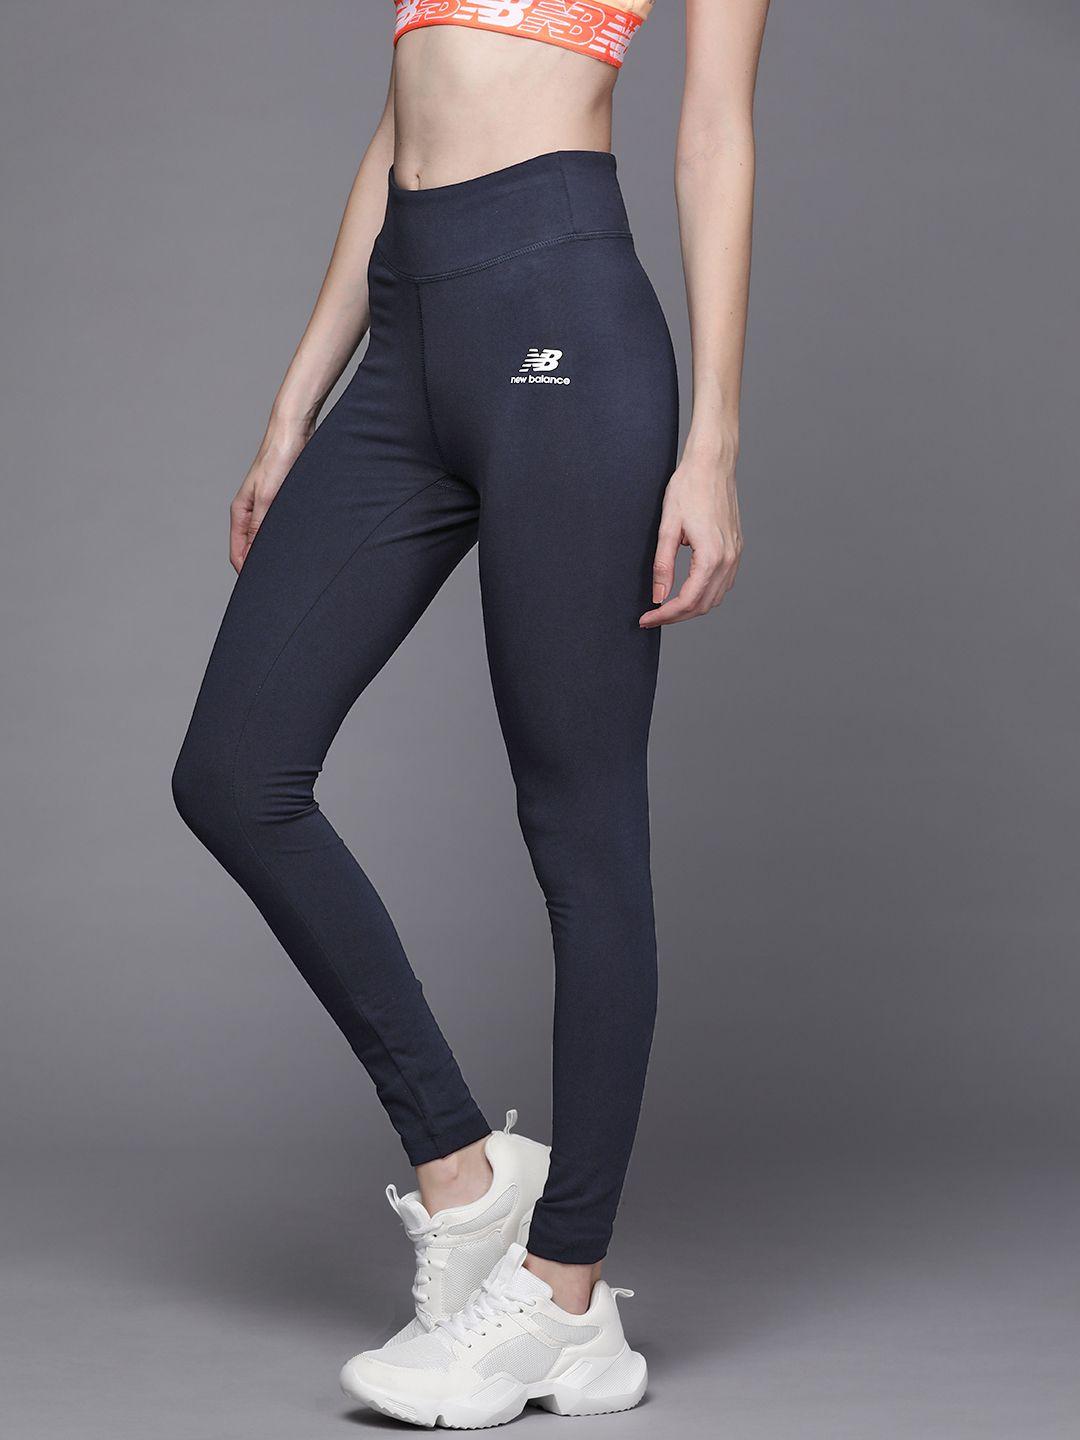 new balance women navy blue solid sports tights